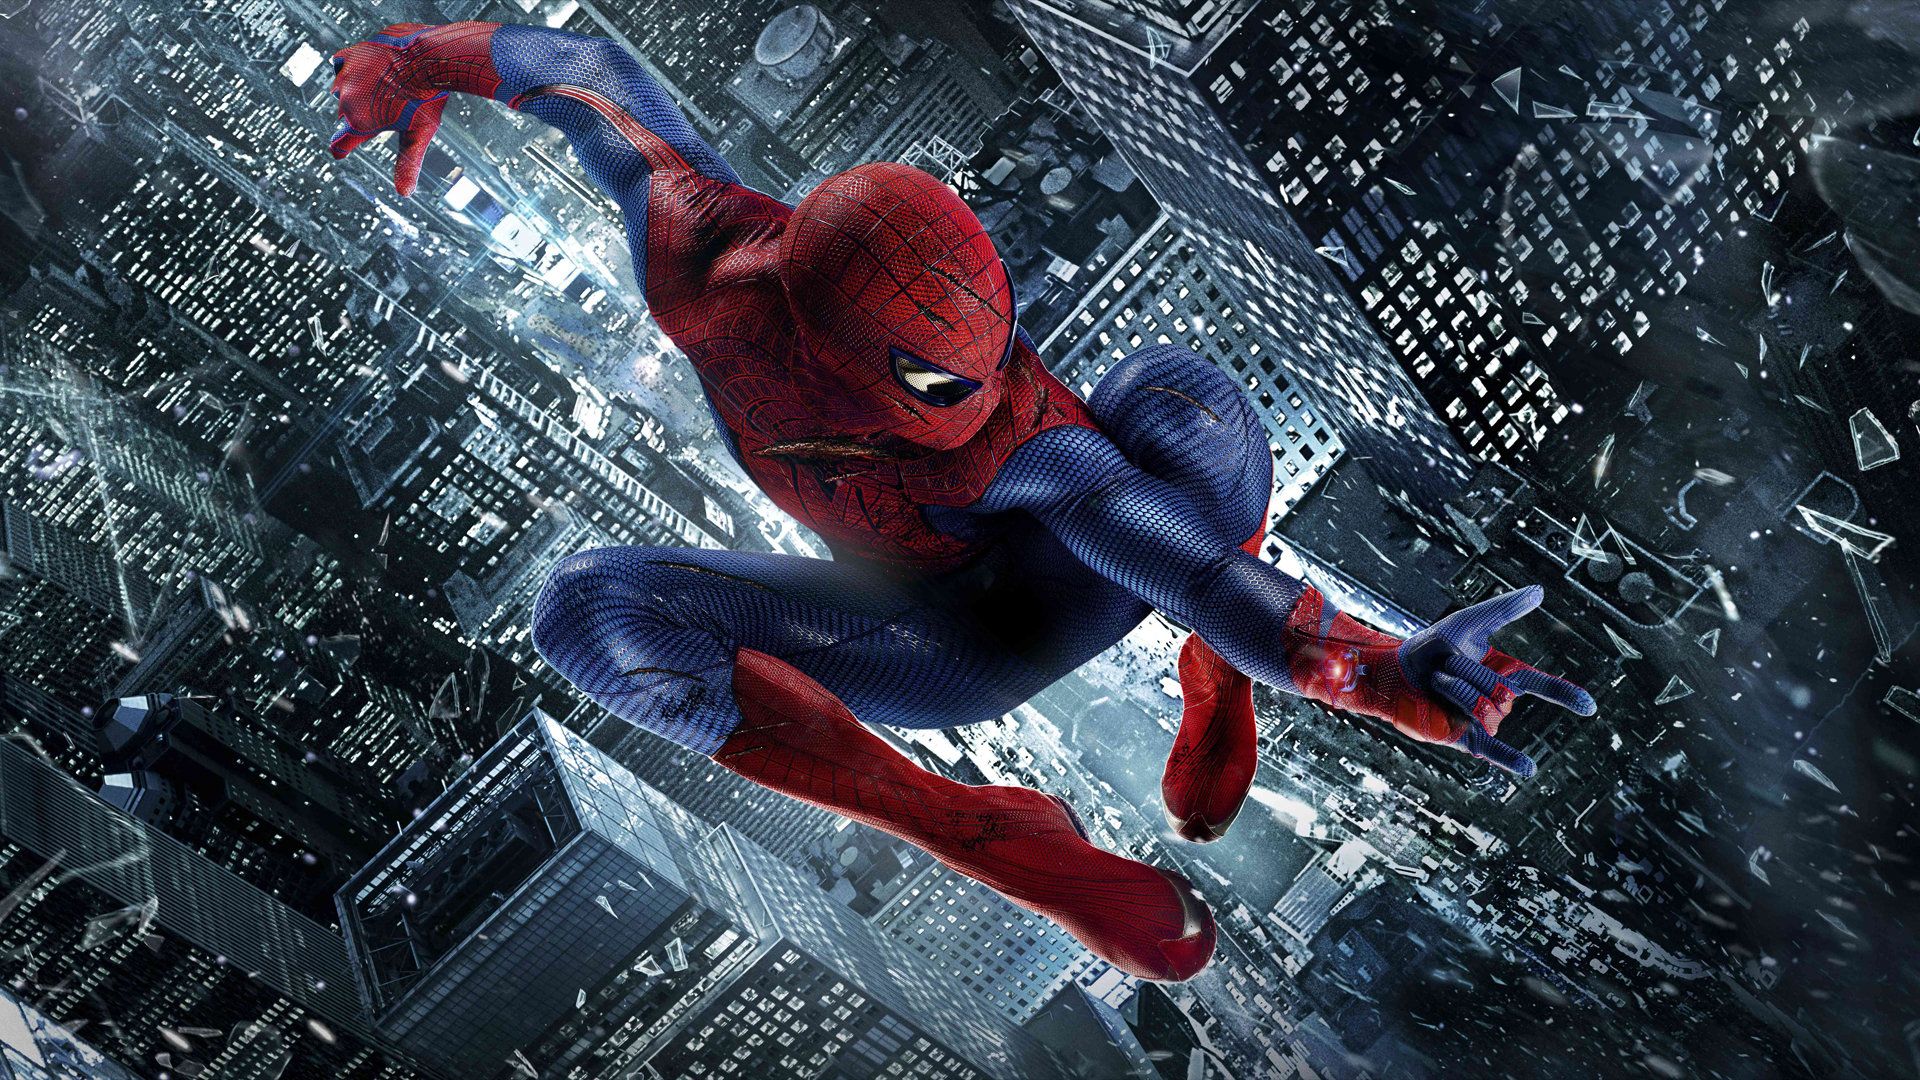 Free Download The Amazing Spider Man Hd Wallpaper for Desktop and Mobiles   Wallpapersnet